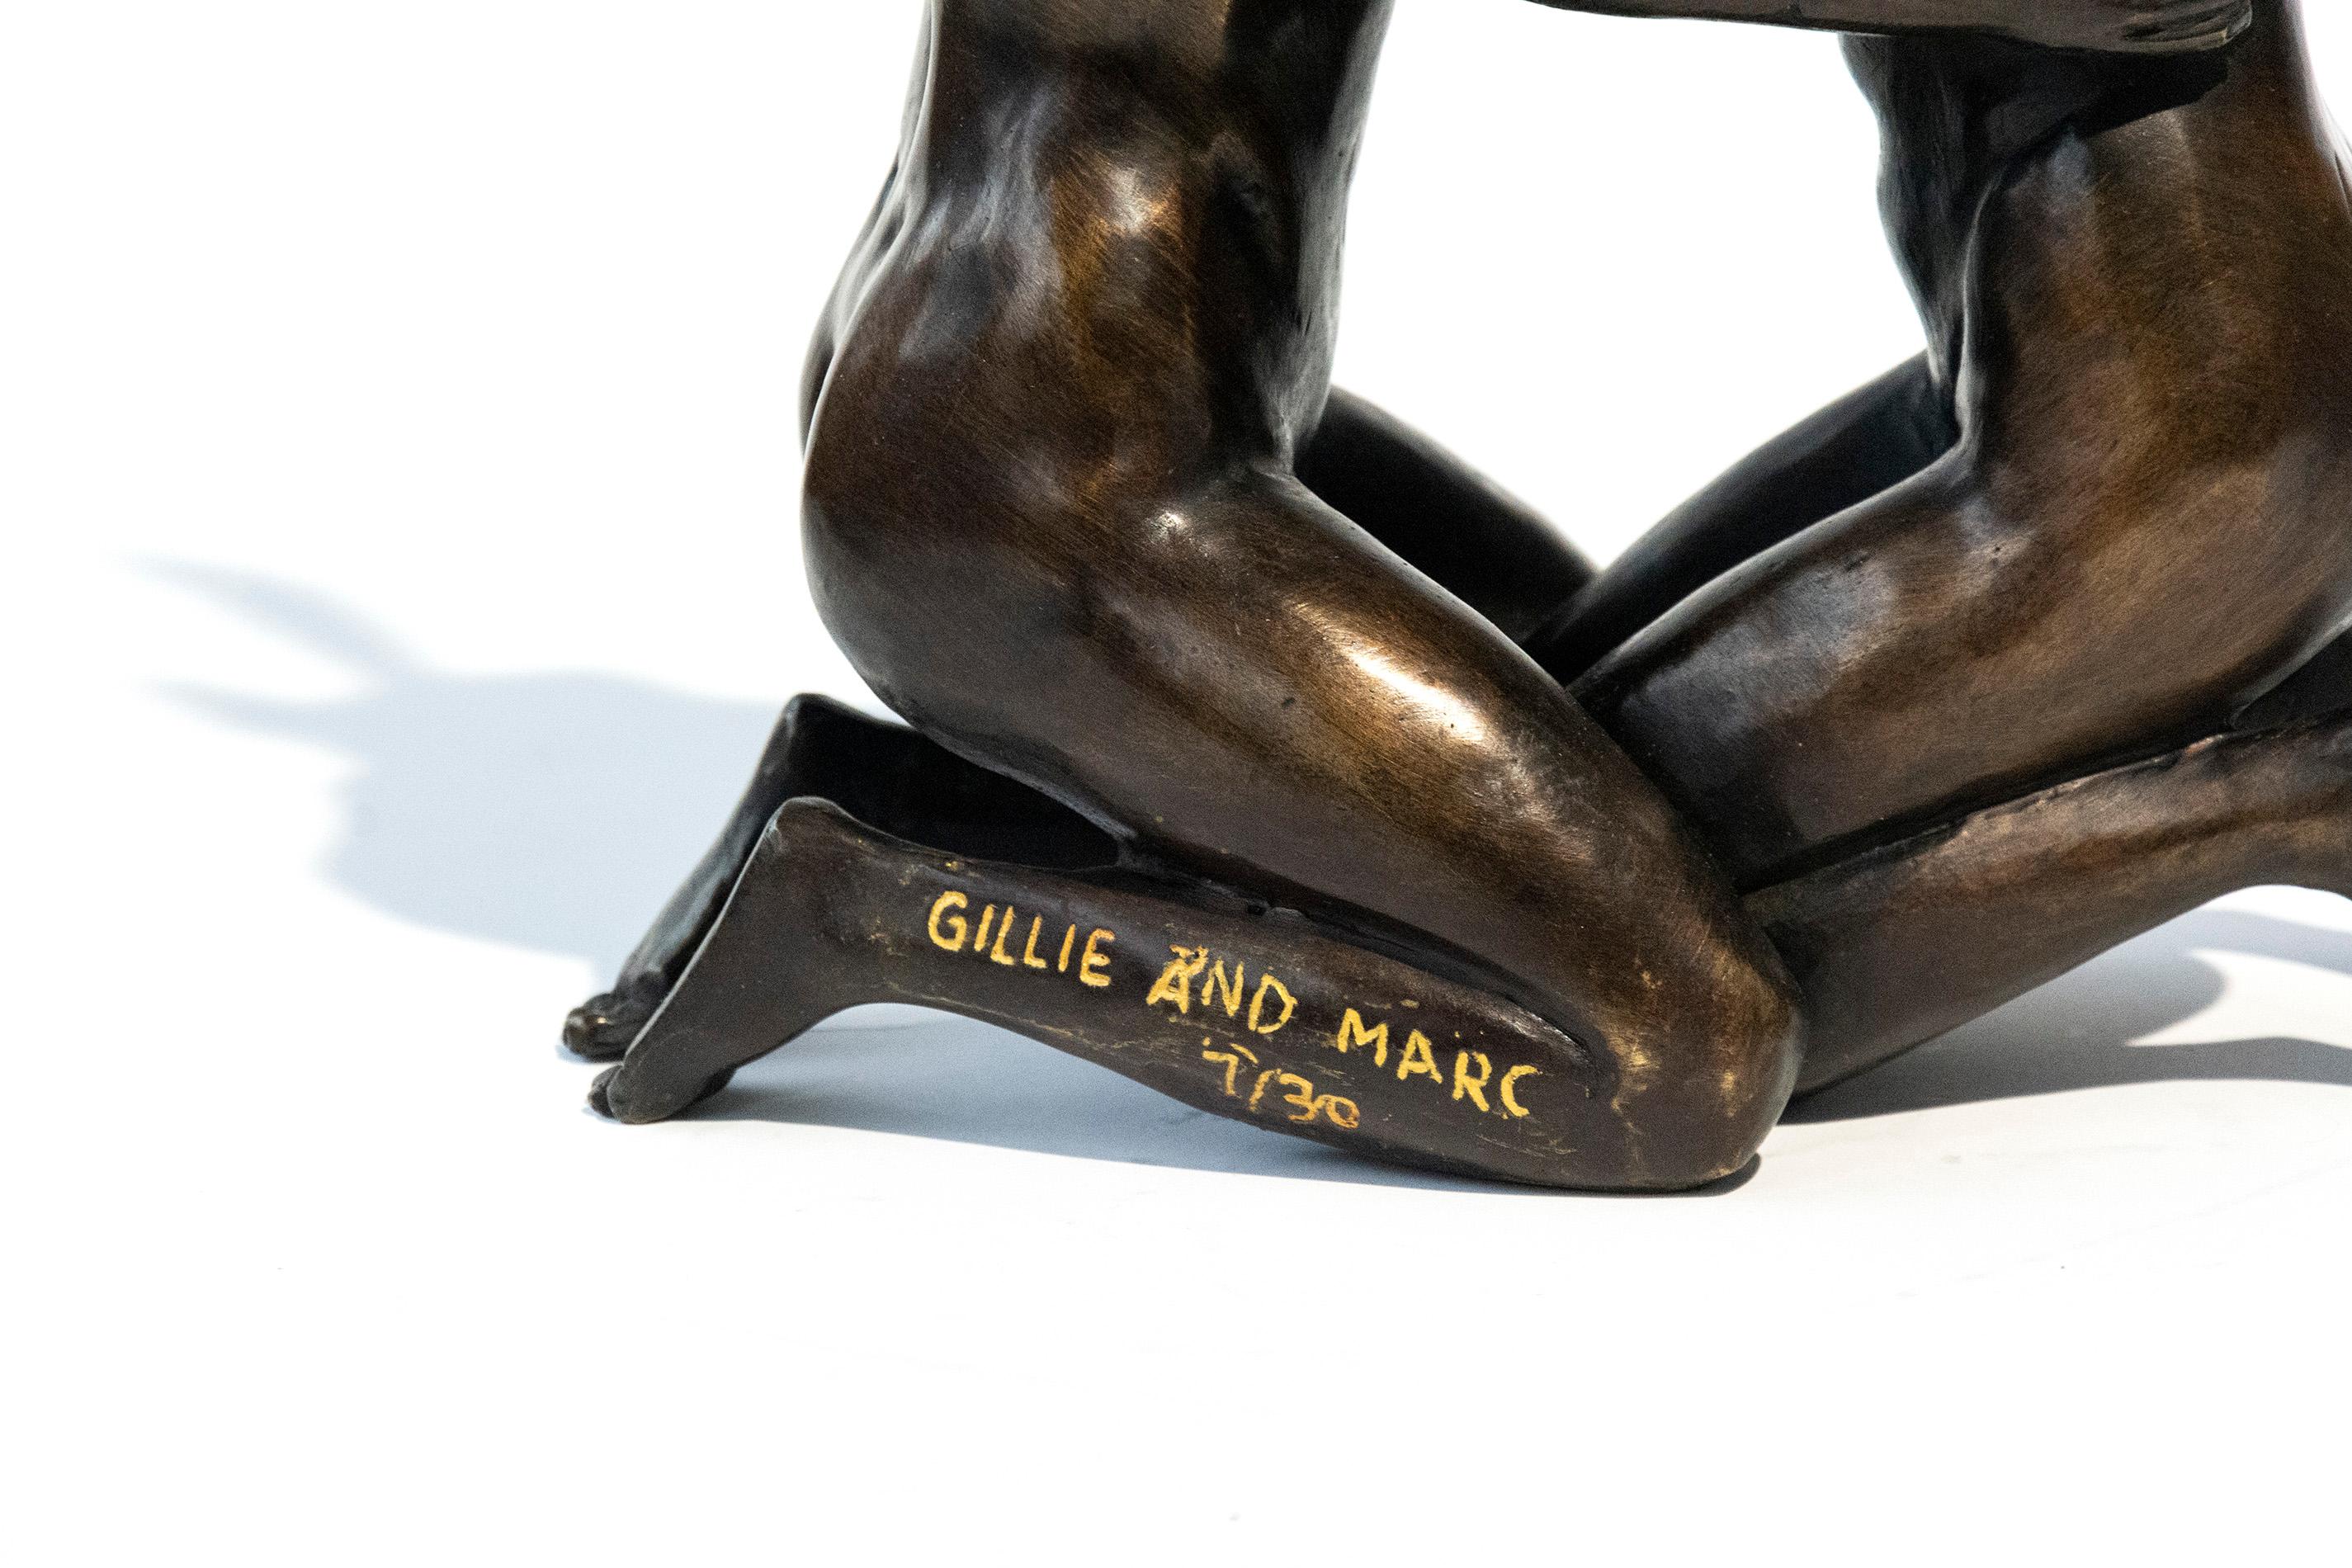 She loved being in love 7/30 - playful, figurative bronze sculpture - Gold Figurative Sculpture by Gillie and Marc Schattner